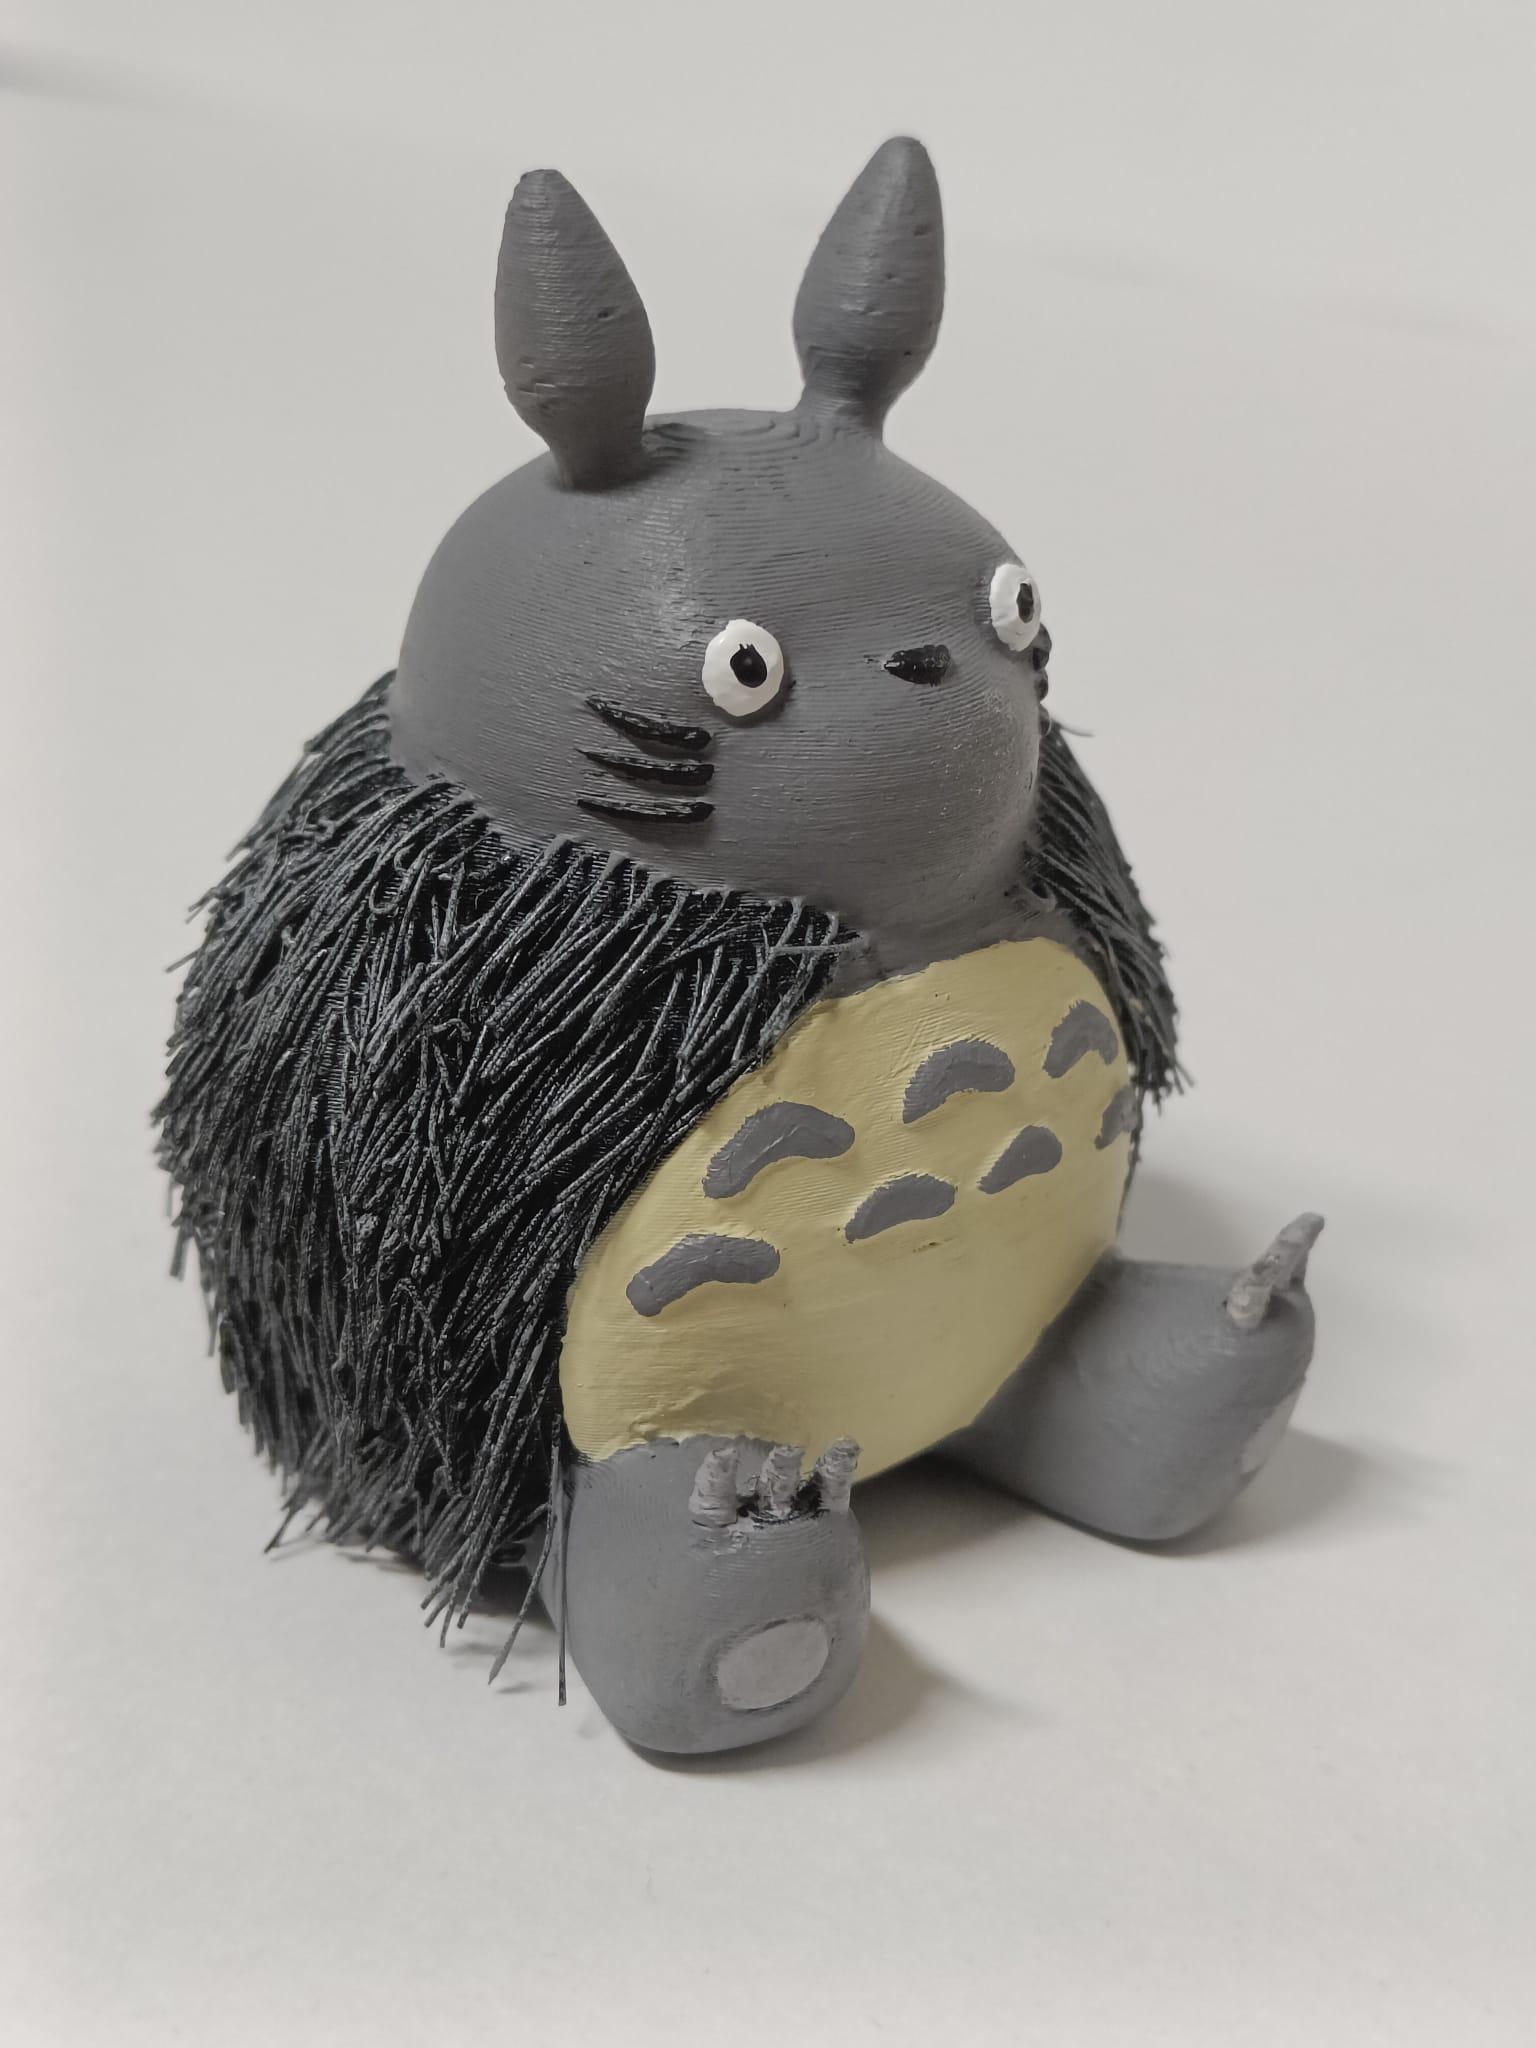 Winter Totoro remixed with Hairify 3d model